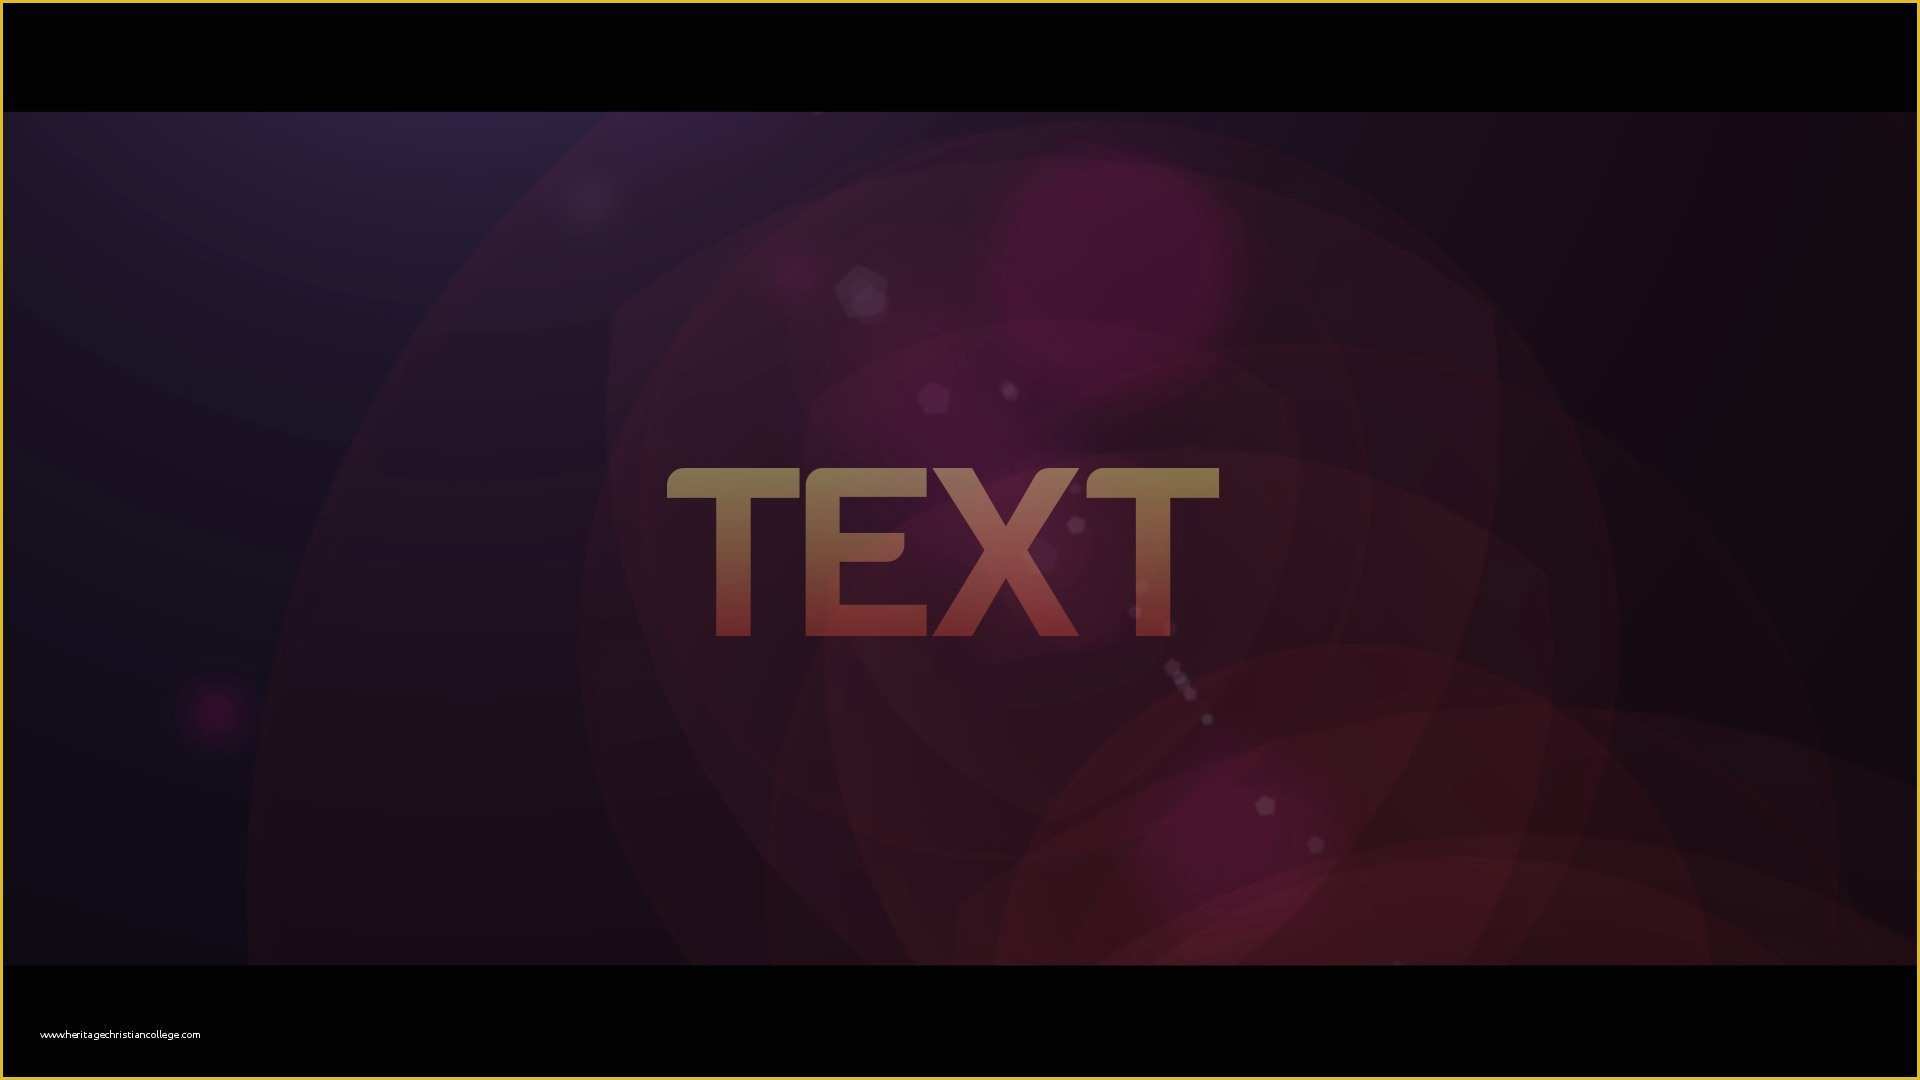 Adobe after Effects Cs5 Intro Templates Free Download Of Simple Text Intro Preview